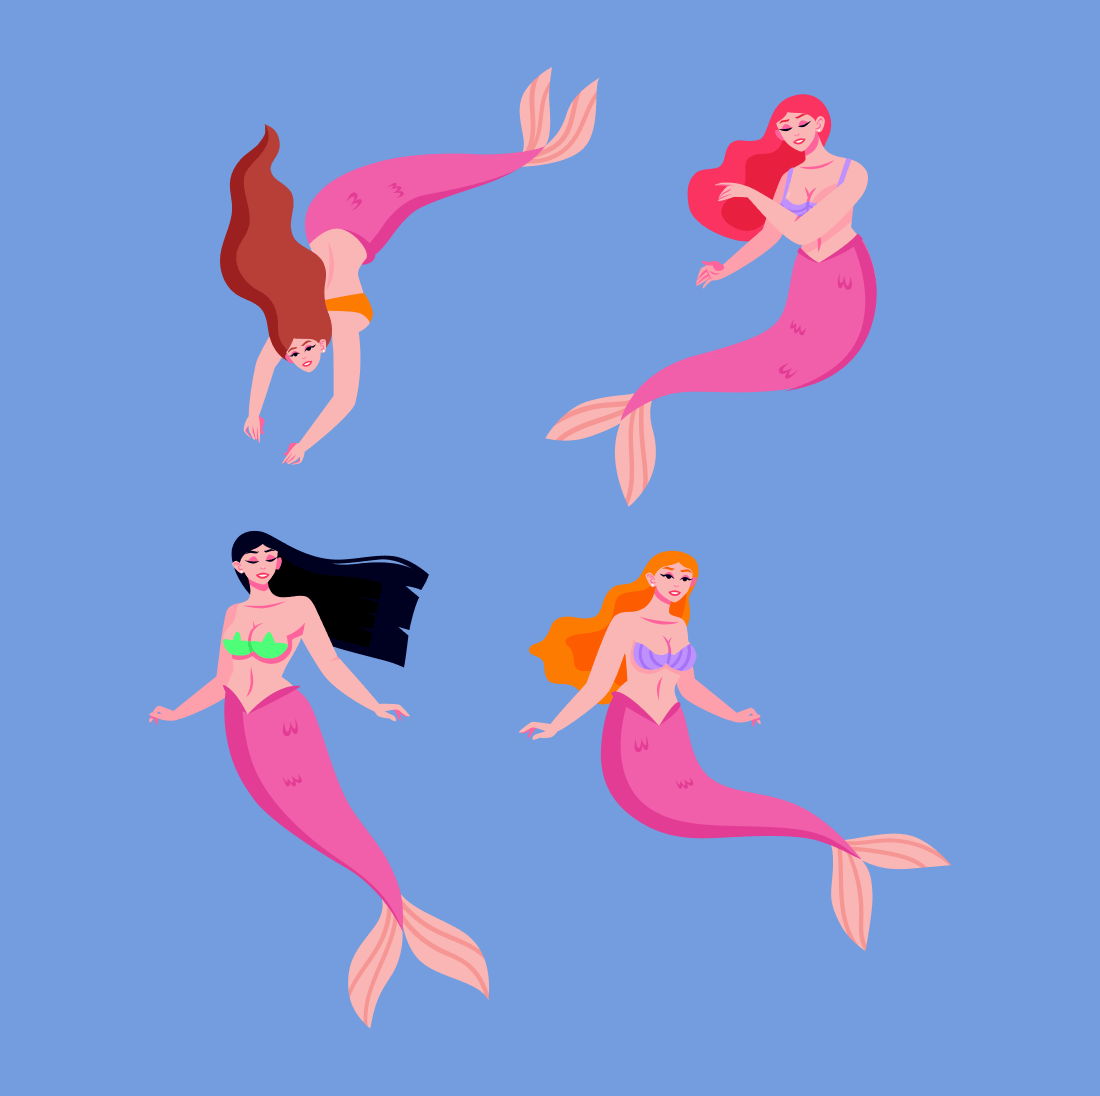 Mermaids with long hair and pink tails play with each other.